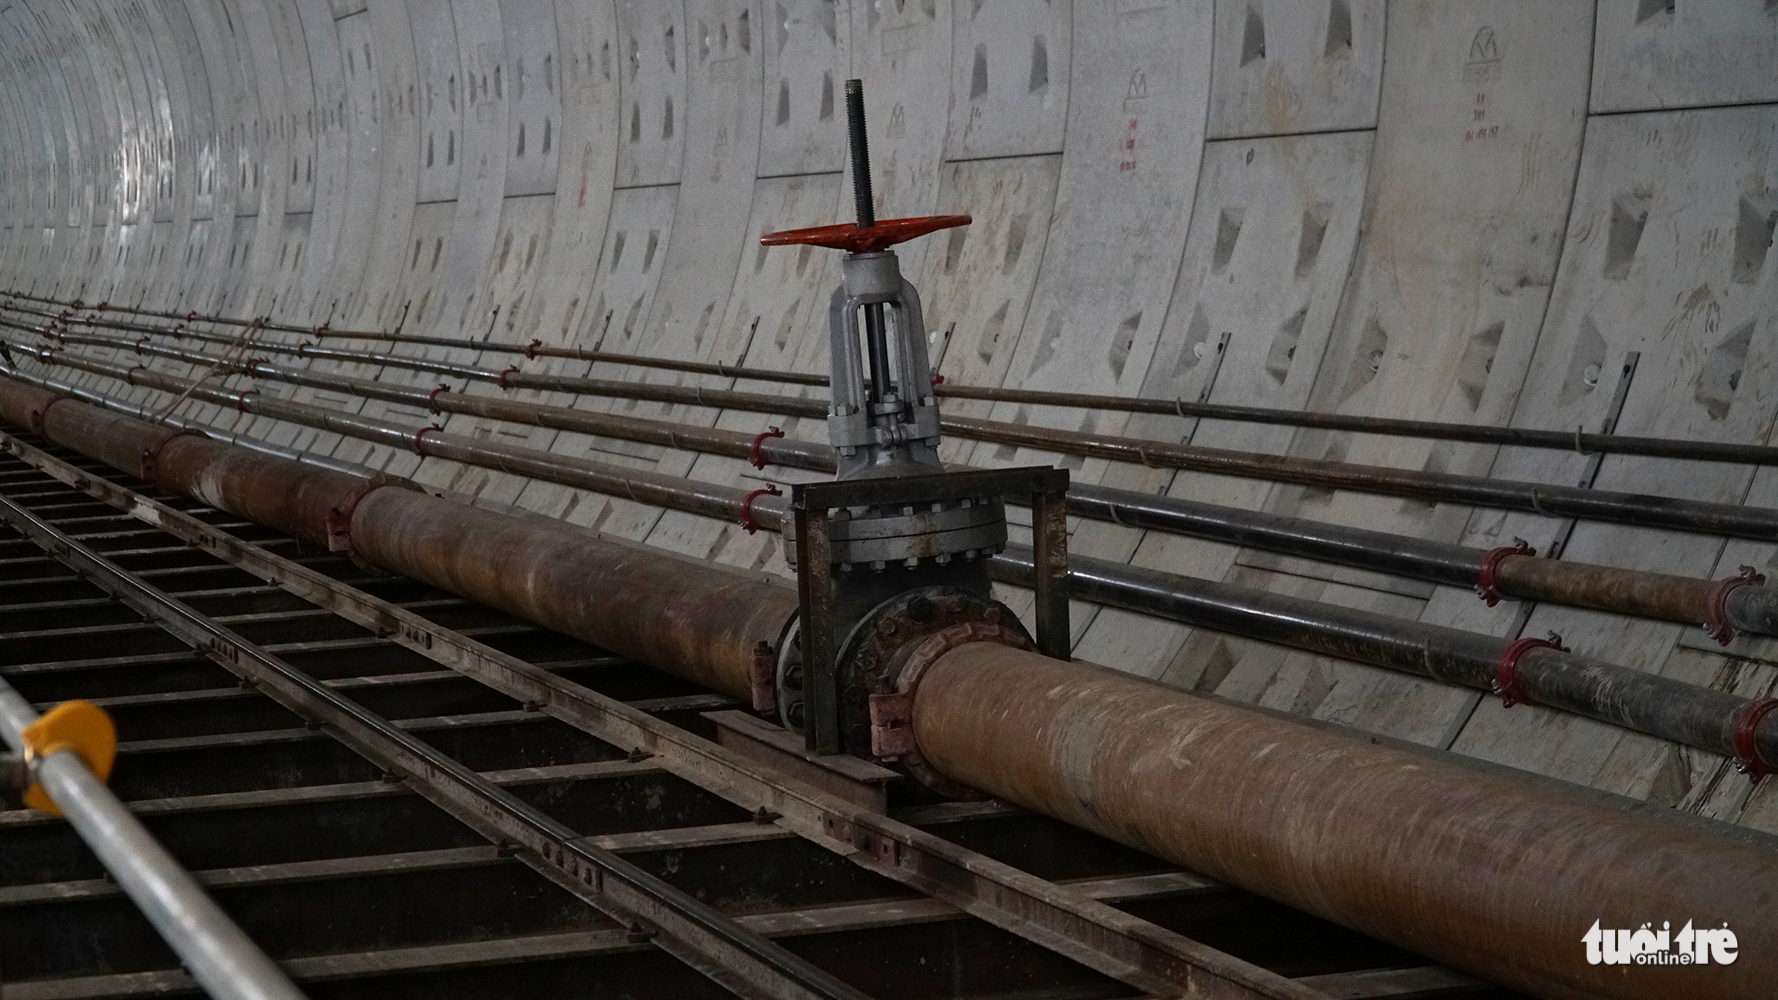 The pipeline systems inside the underground passage.